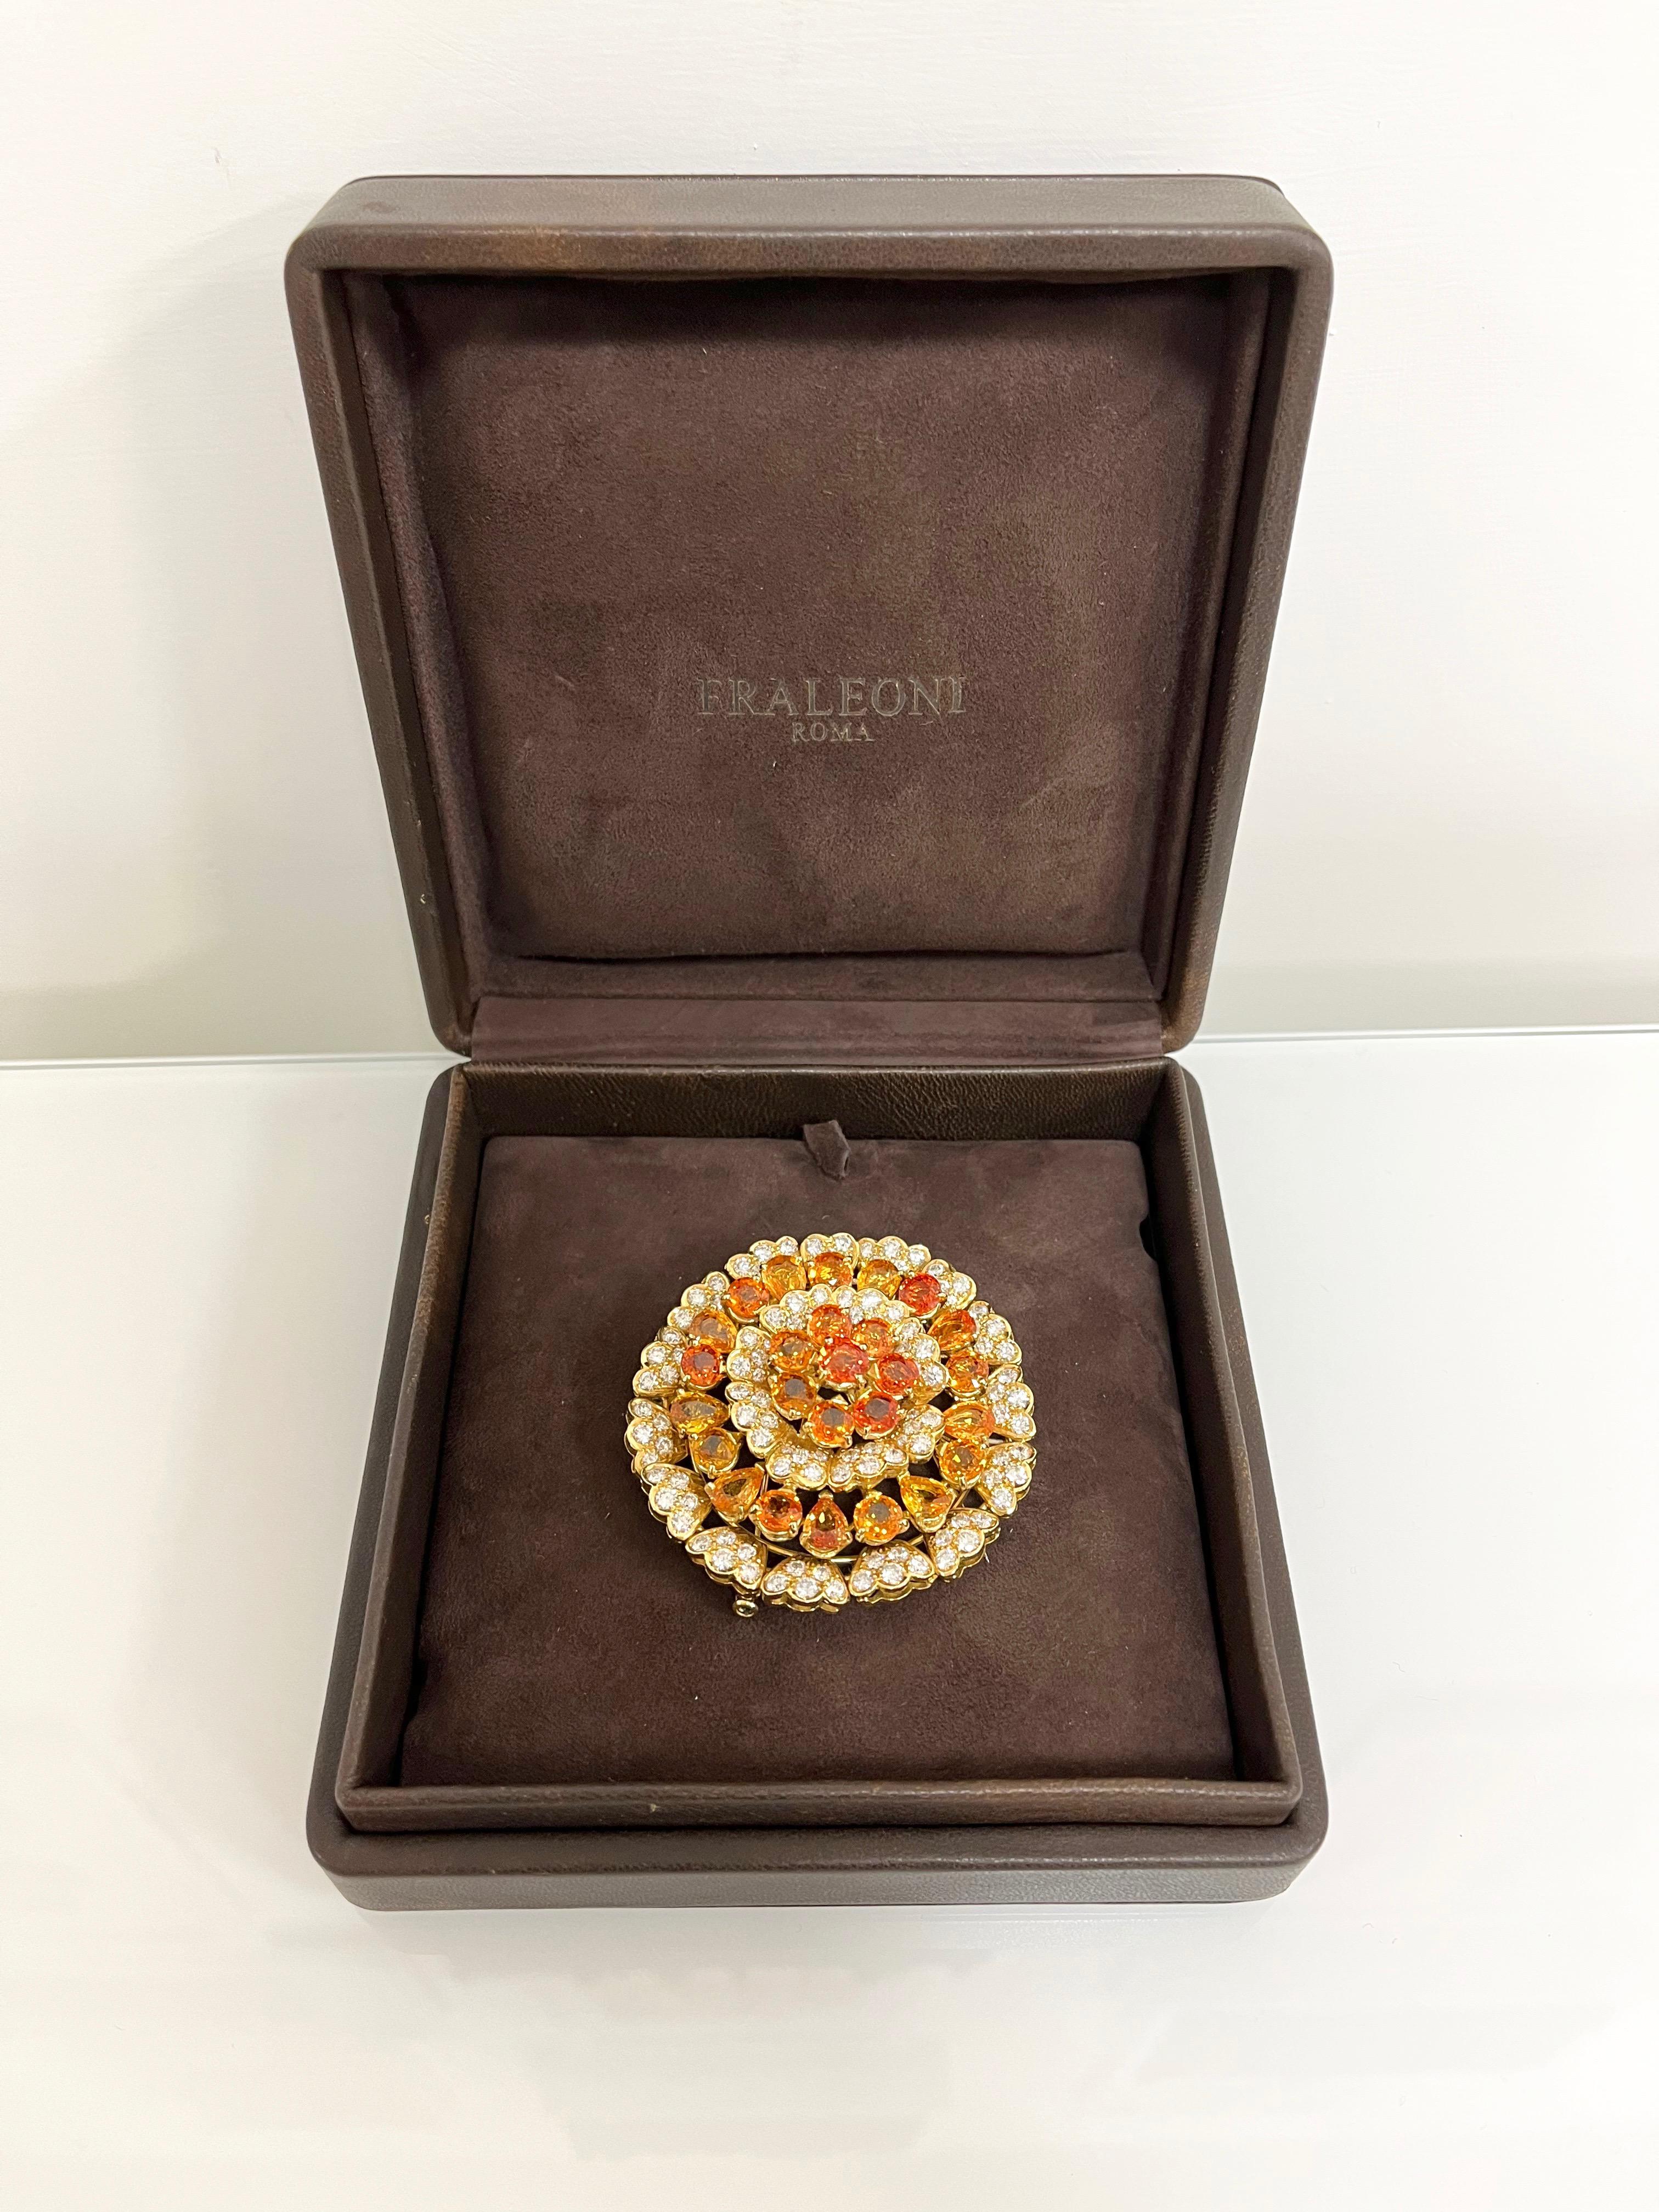 18 kt. yellow gold brooch with 8.91 ct. of round cut diamonds and 33.15 ct. of round and oval cut multicolored sapphires.
This classic brooch is hand-made in Italy.
The brooch can also be used as a pendant.
One of a kind piece.
1970 ca.
Weight gr.